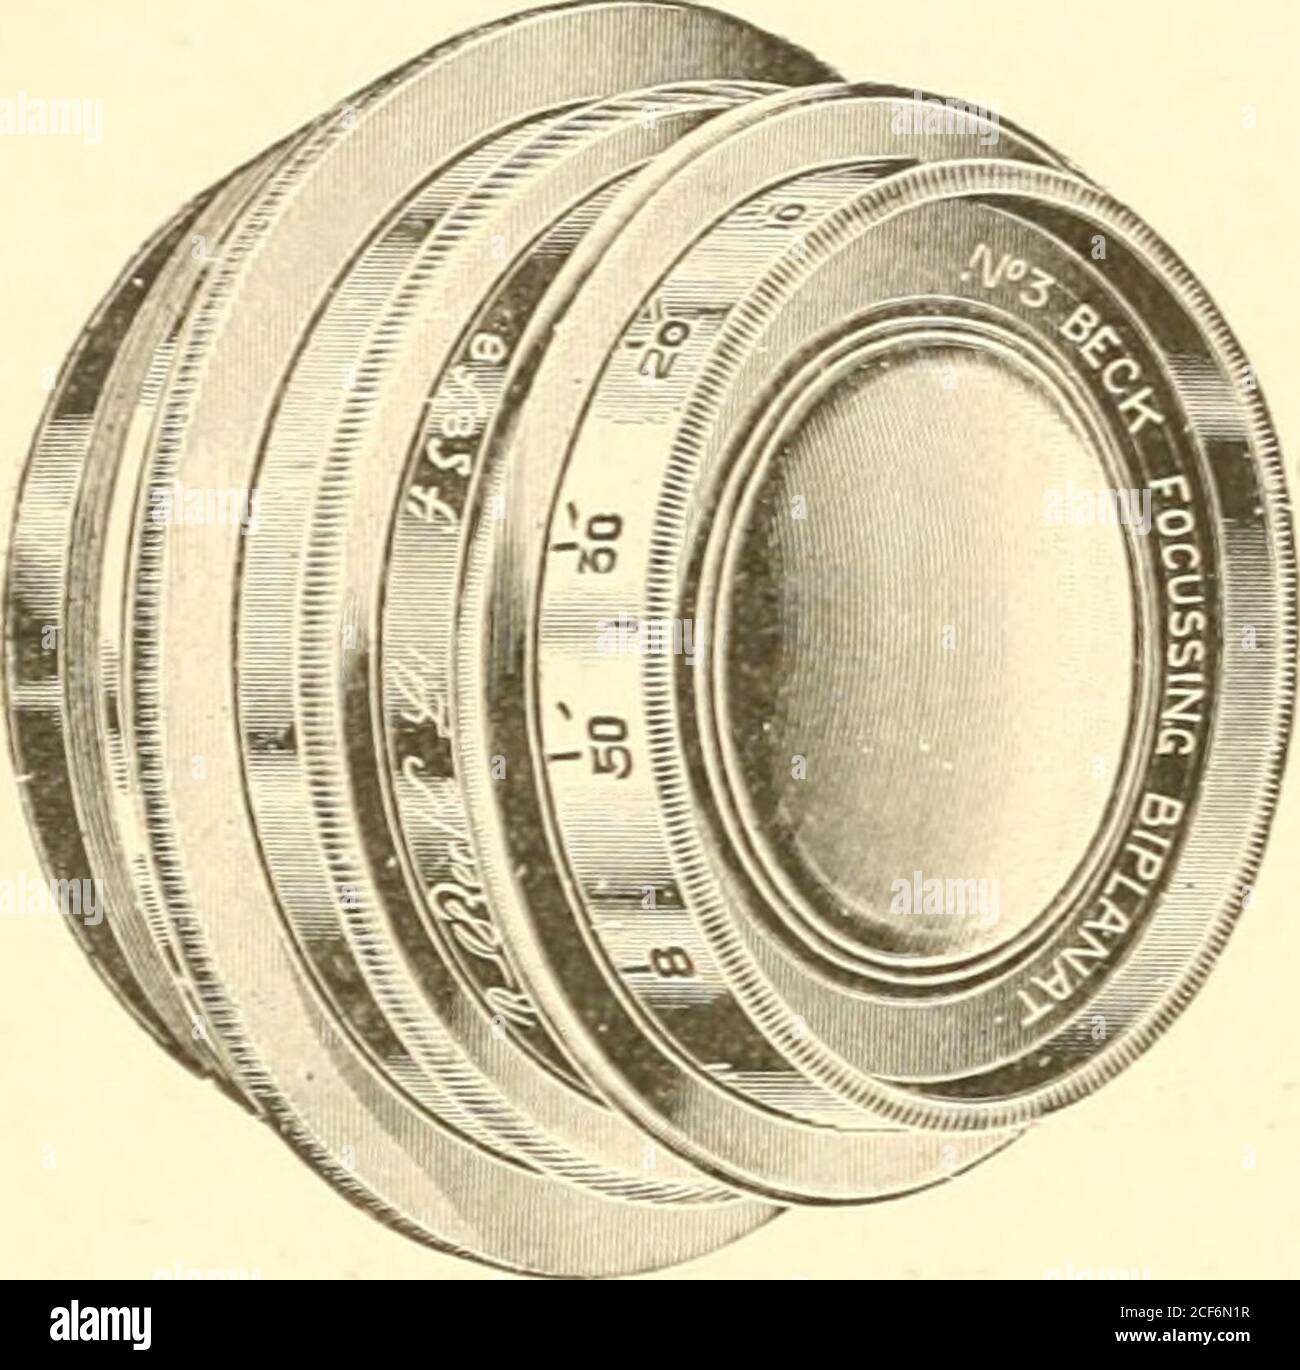 . The book of photography; practical, theoretical and applied. Fig. .507.—Dallmeyer Wide-axole RectilixeakLens. time considered possible ; as, for instance,,in the portrait lens of Voigtlander (Fig.50o), which works at f/2.o. The Cookeportrait lens (Fig. 504) consists of threesimple glasses only, and, as will be seen,allows of adjustment between its com-ponents, to secure different effects. TheI)allmeyer-Bergheim lens is a favouritewith workers of the impressionist school.It consists of two uncorrected single 3fJ6 THE BOOK OF PHOTOGRAPHY. lenses, of negative and positive curvaturerespectively, Stock Photo